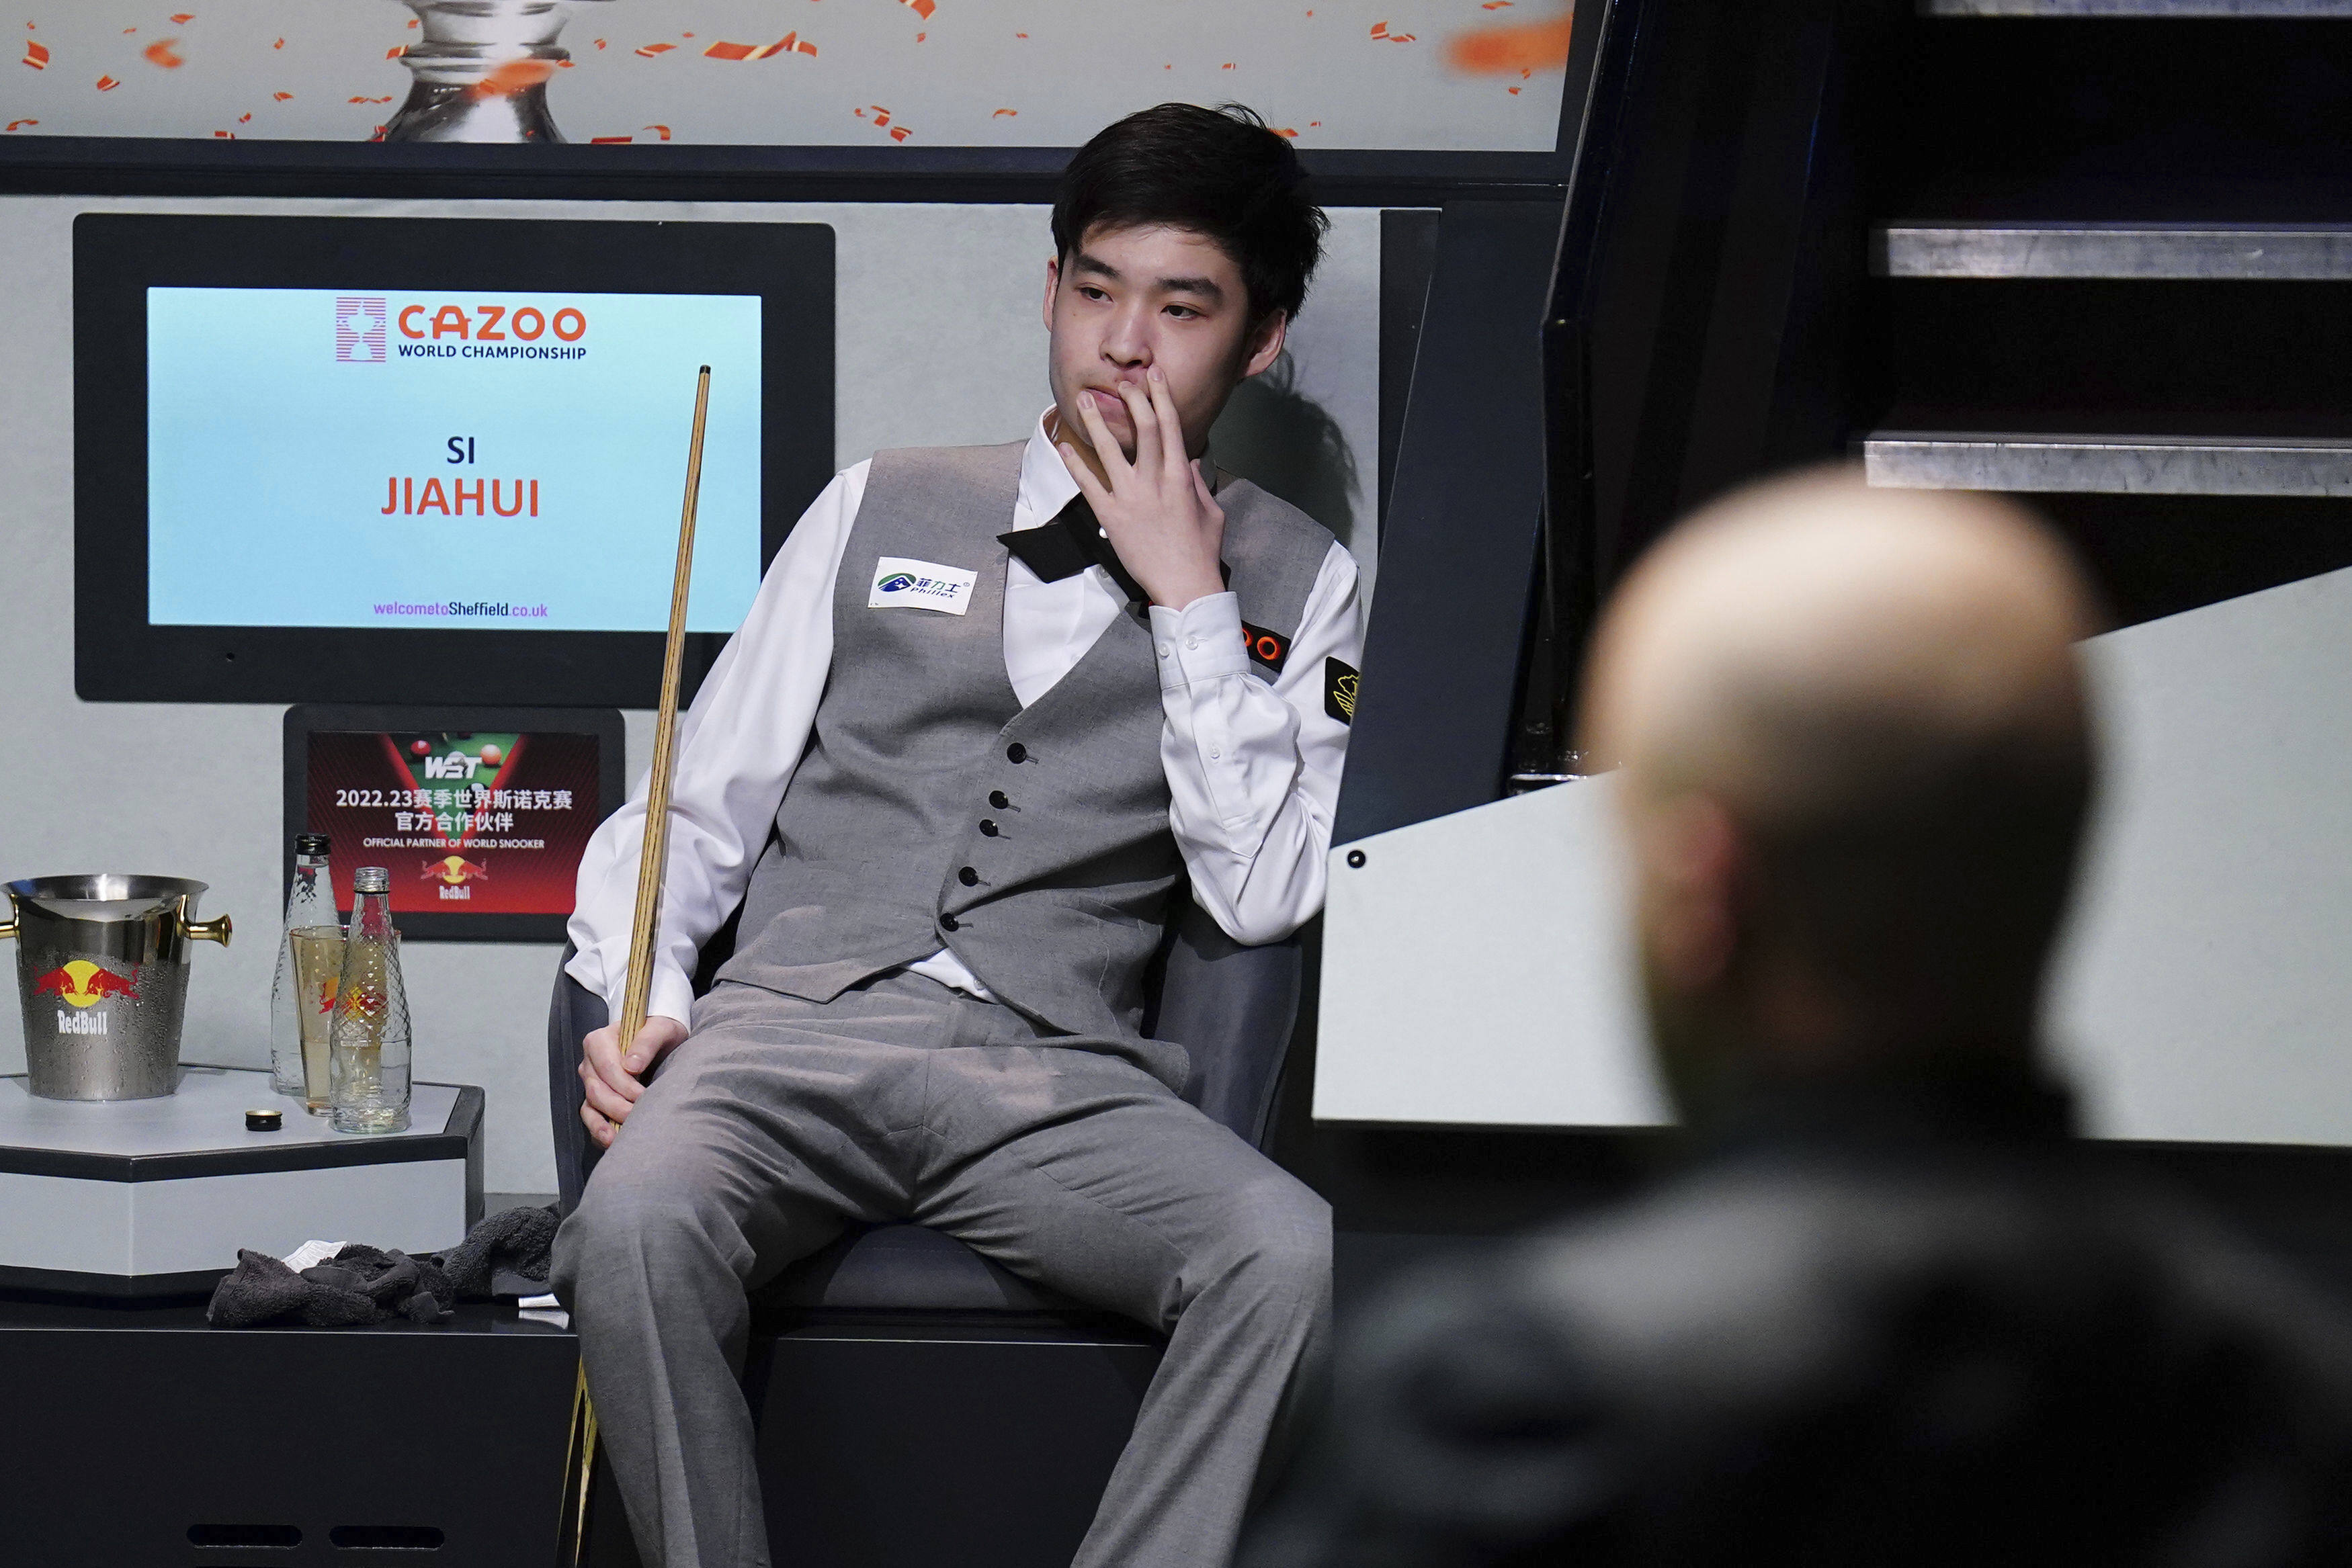 A dejected Si Jiahui watches as Luca Brecel wins another frame at the World Snooker Championship. Photo: AP